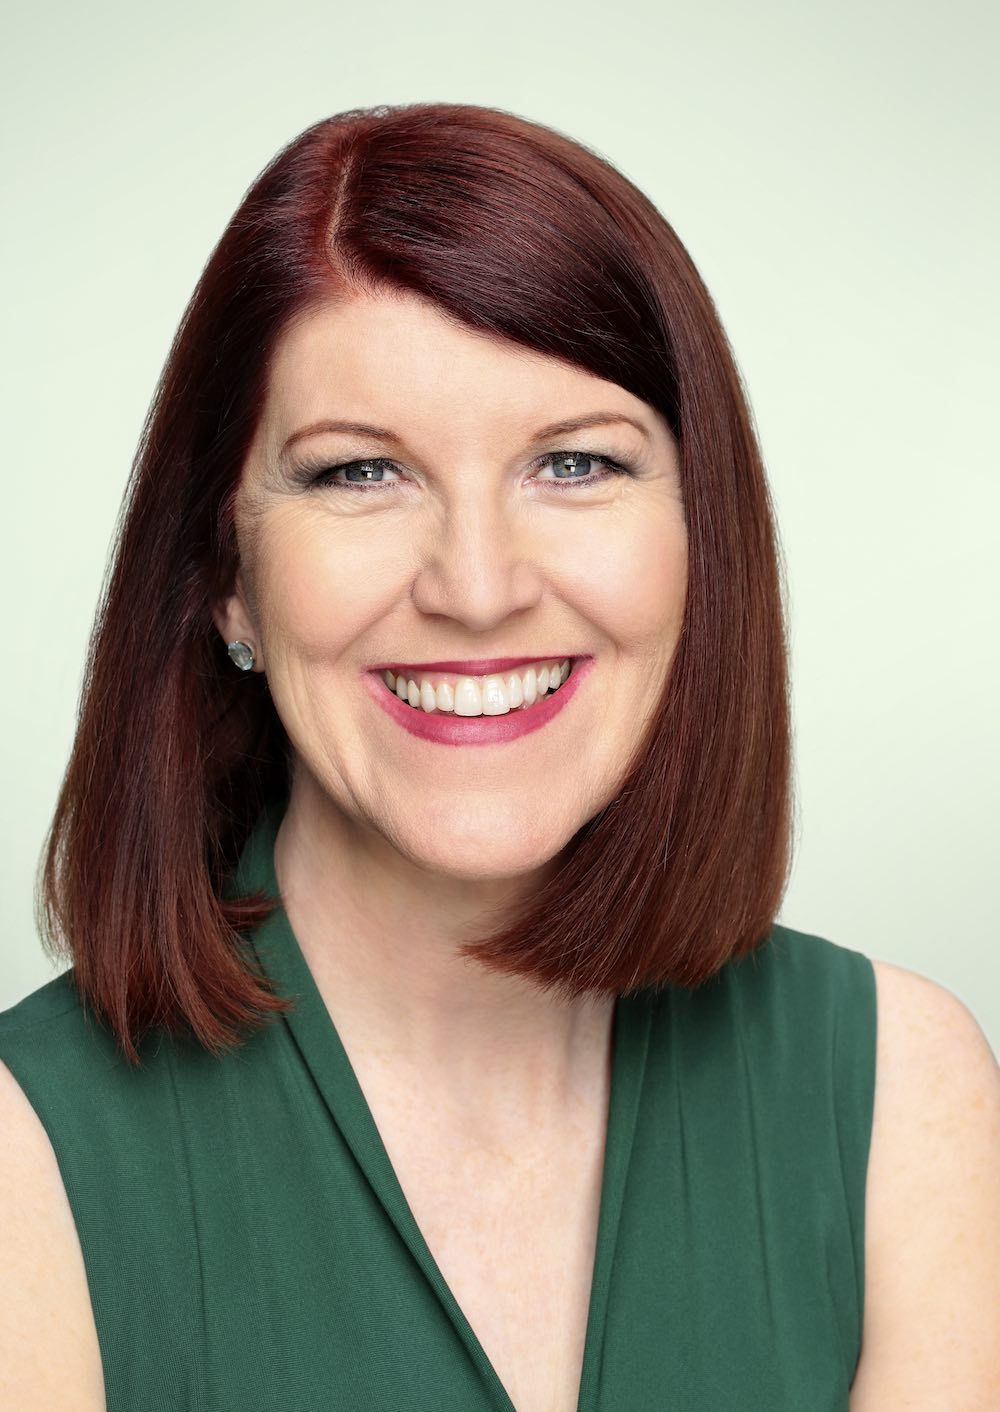 Kate Flannery. PHOTO CREDIT: Courtesy of Kate Flannery.